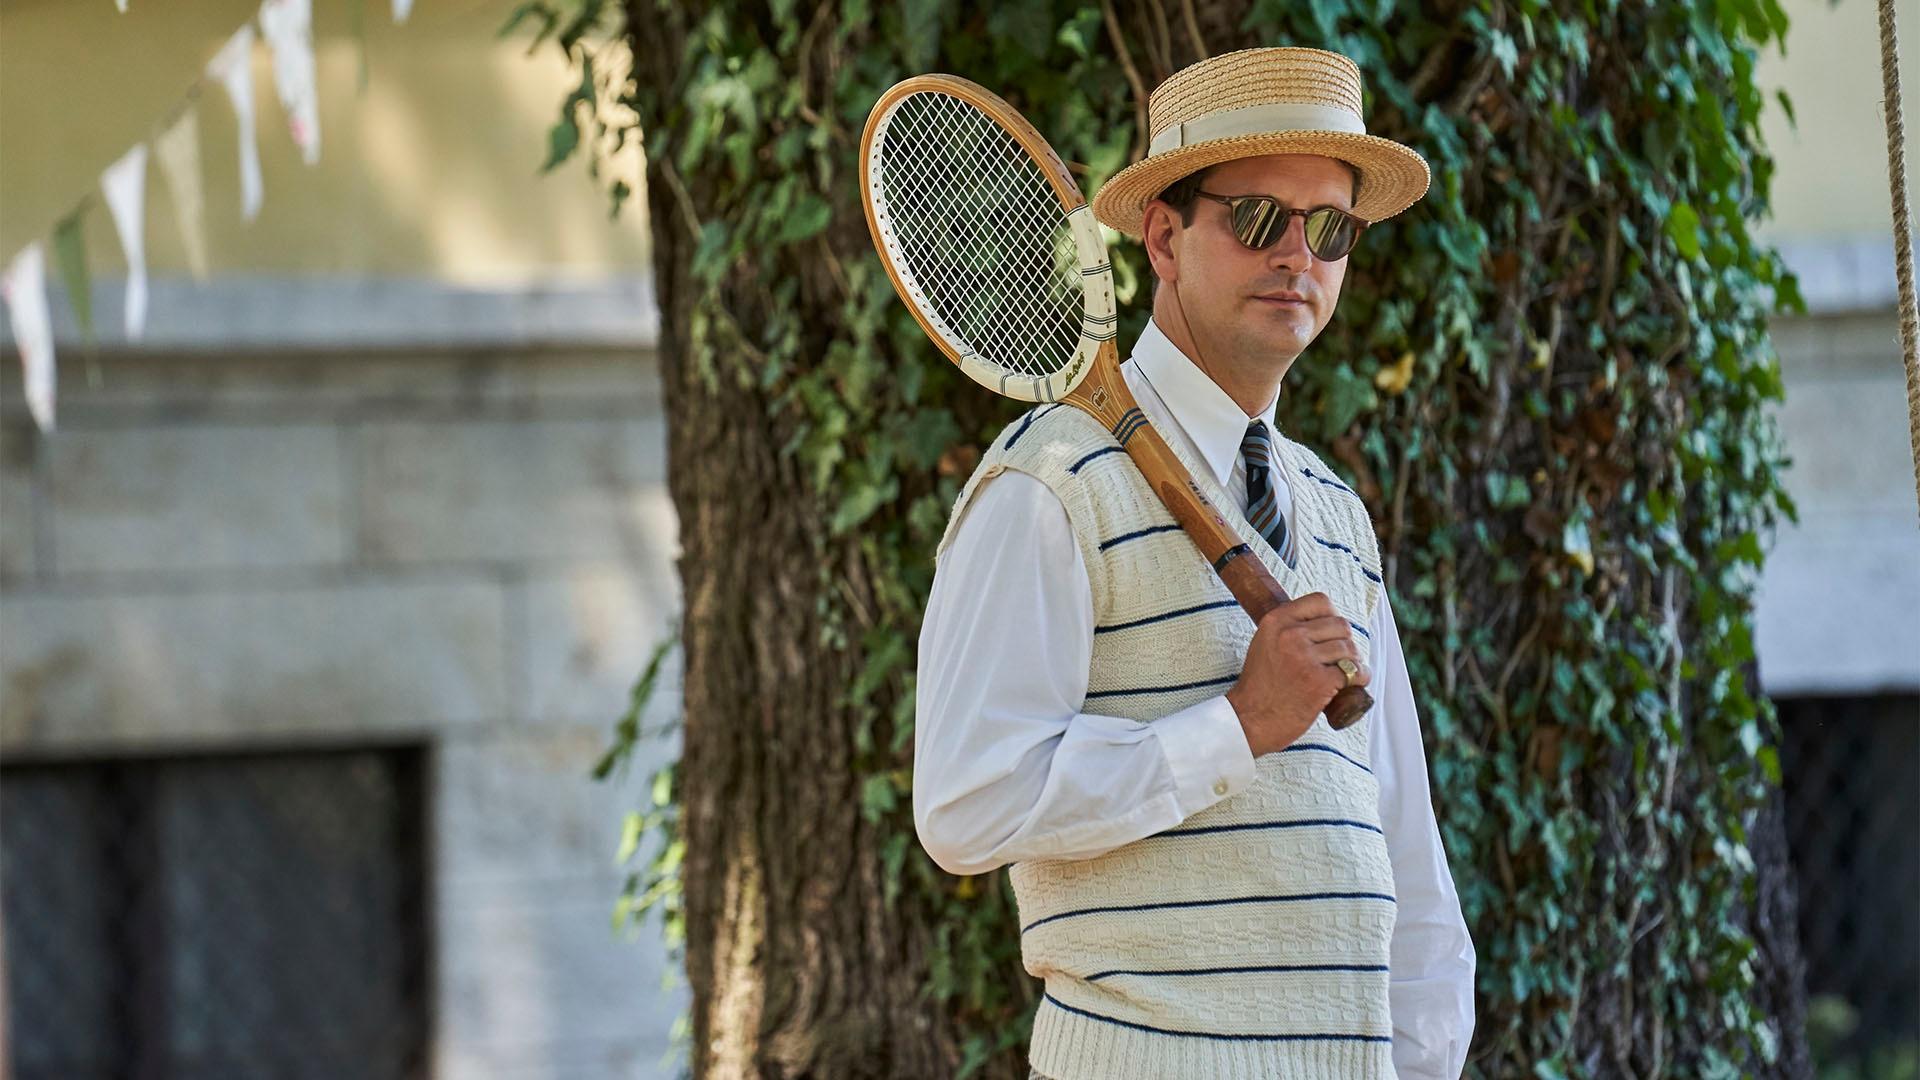 Dominic Tighe as Pelham Wingfield with his winning tennis racket. 